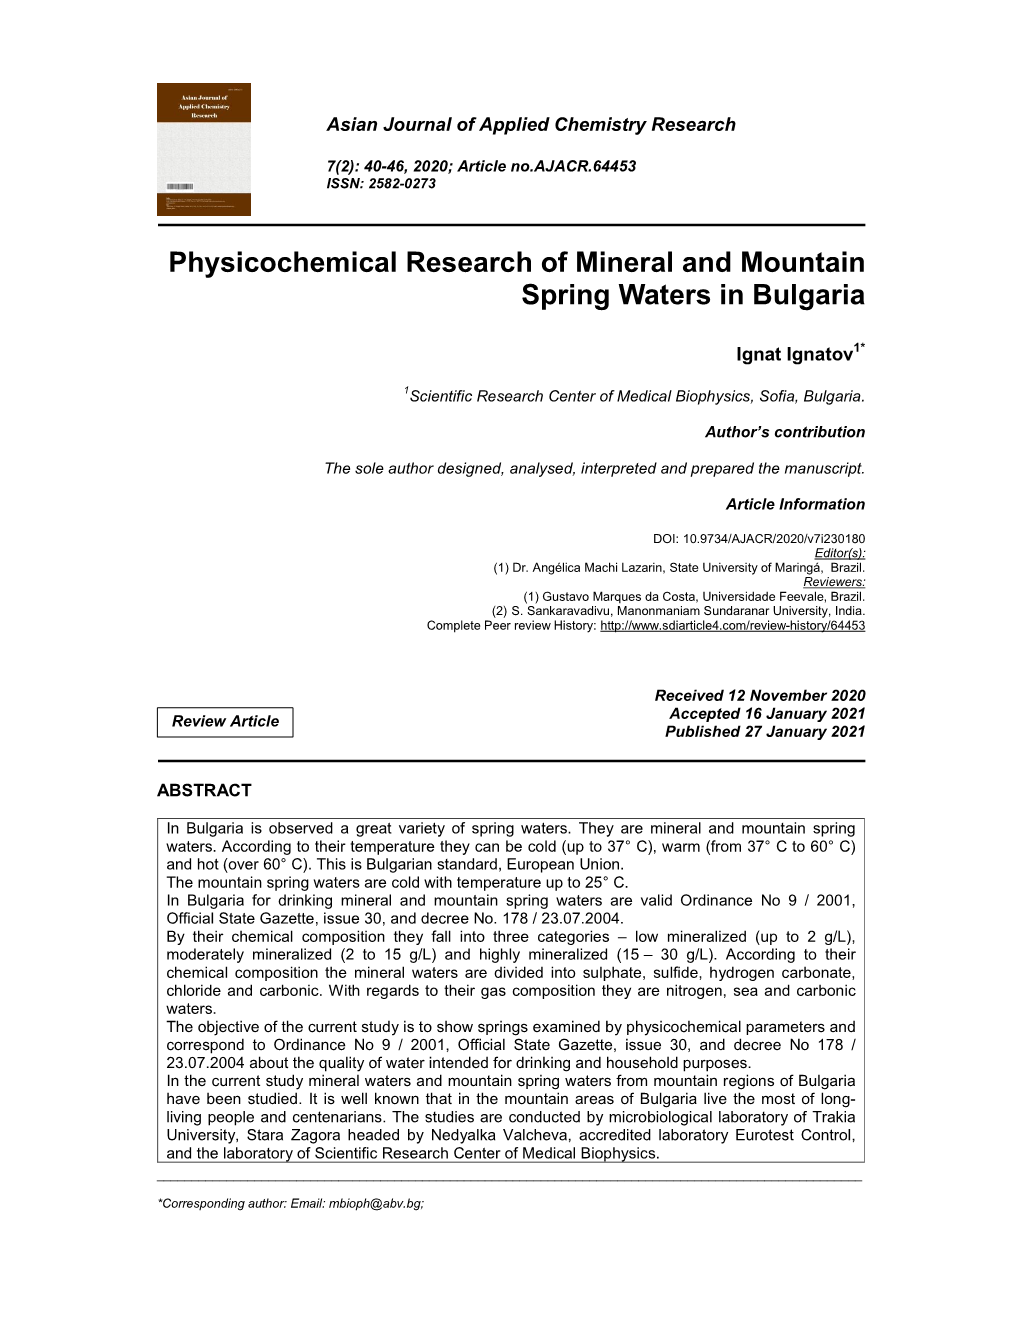 Physicochemical Research of Mineral and Mountain Spring Waters in Bulgaria